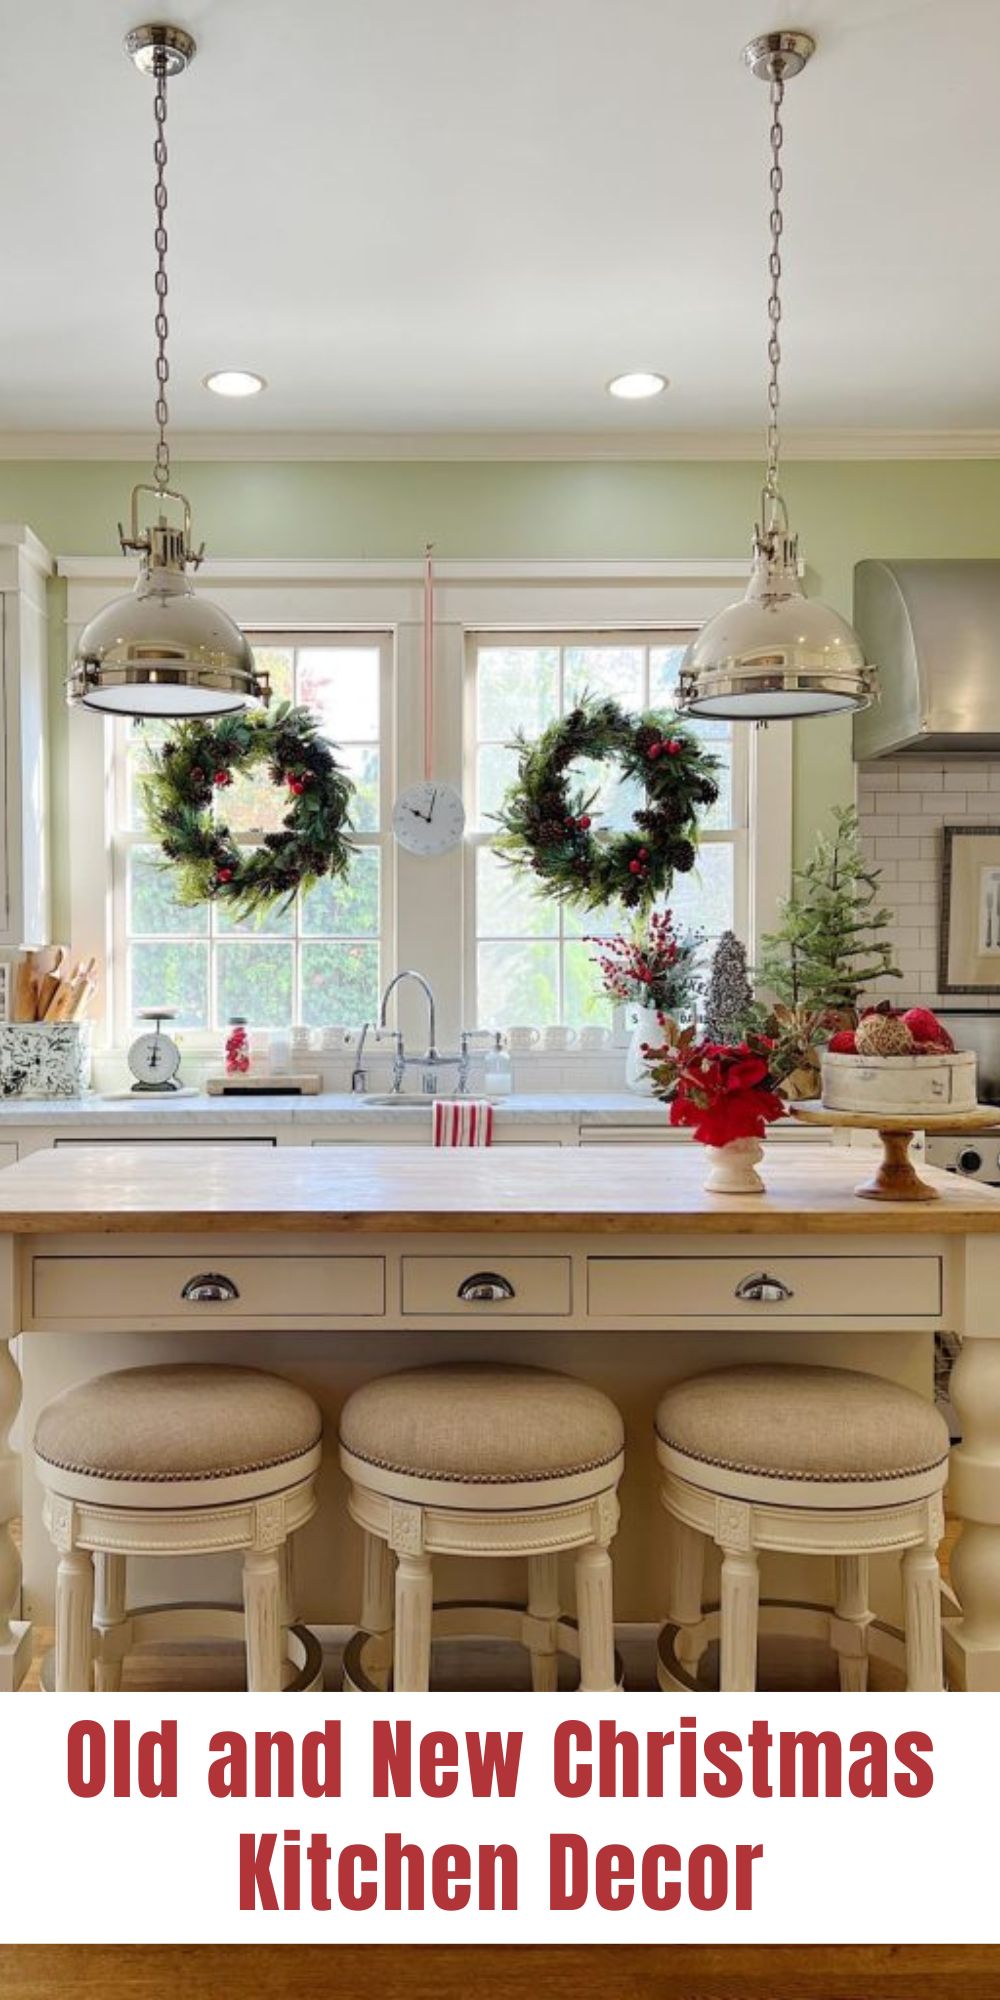 Decorating our kitchen for Christmas is easy to do because it's white with green walls! I had fun using old and new Christmas Kitchen Decor.